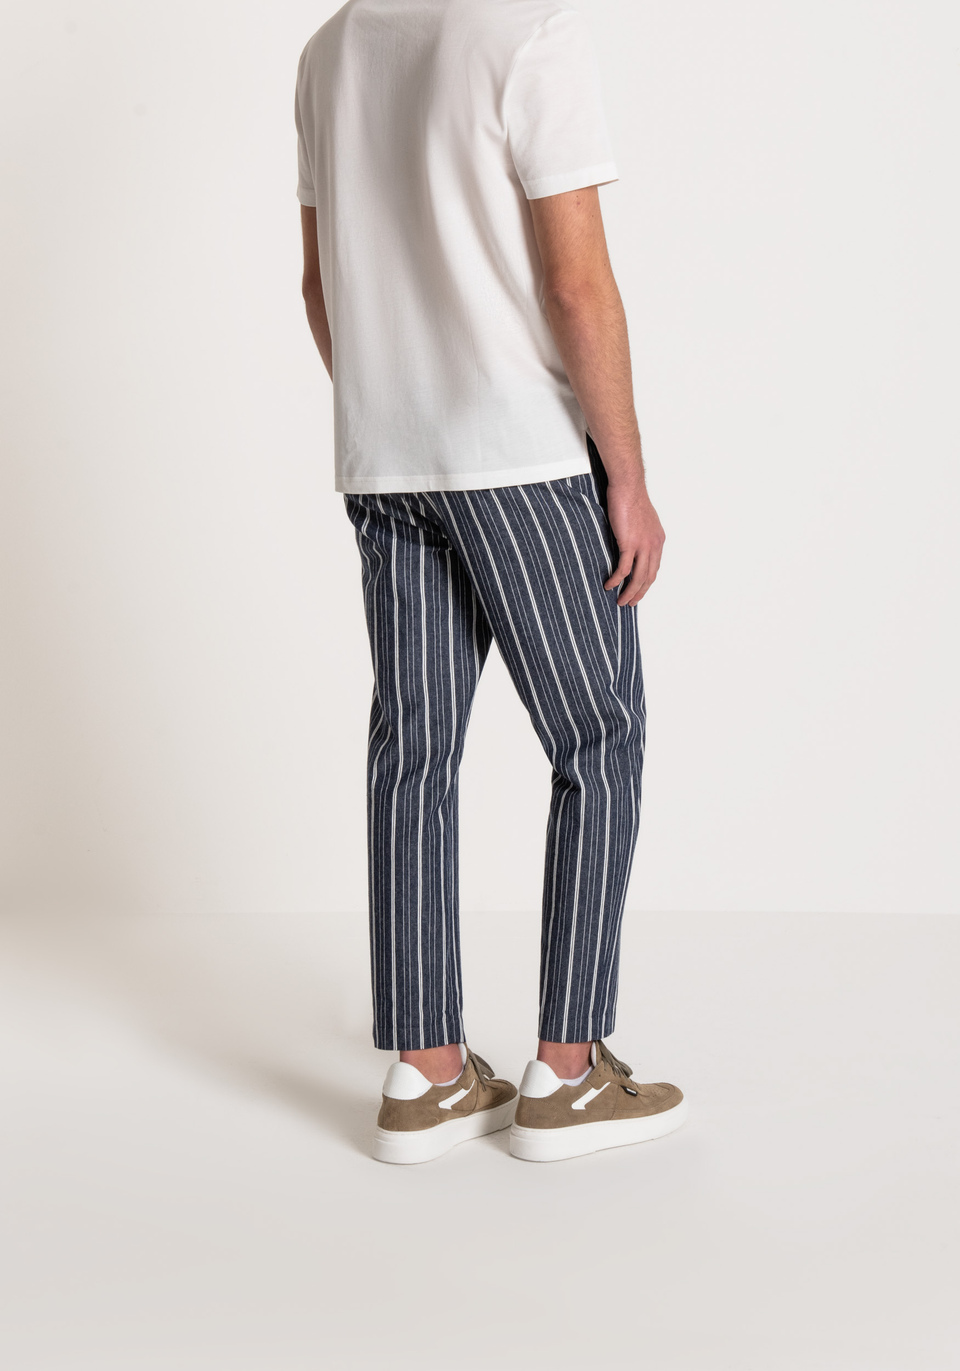 SLIM-FIT “JOE” TROUSERS IN 100% COOL COTTON WITH AN ELASTICATED DRAWSTRING WAIST - Antony Morato Online Shop